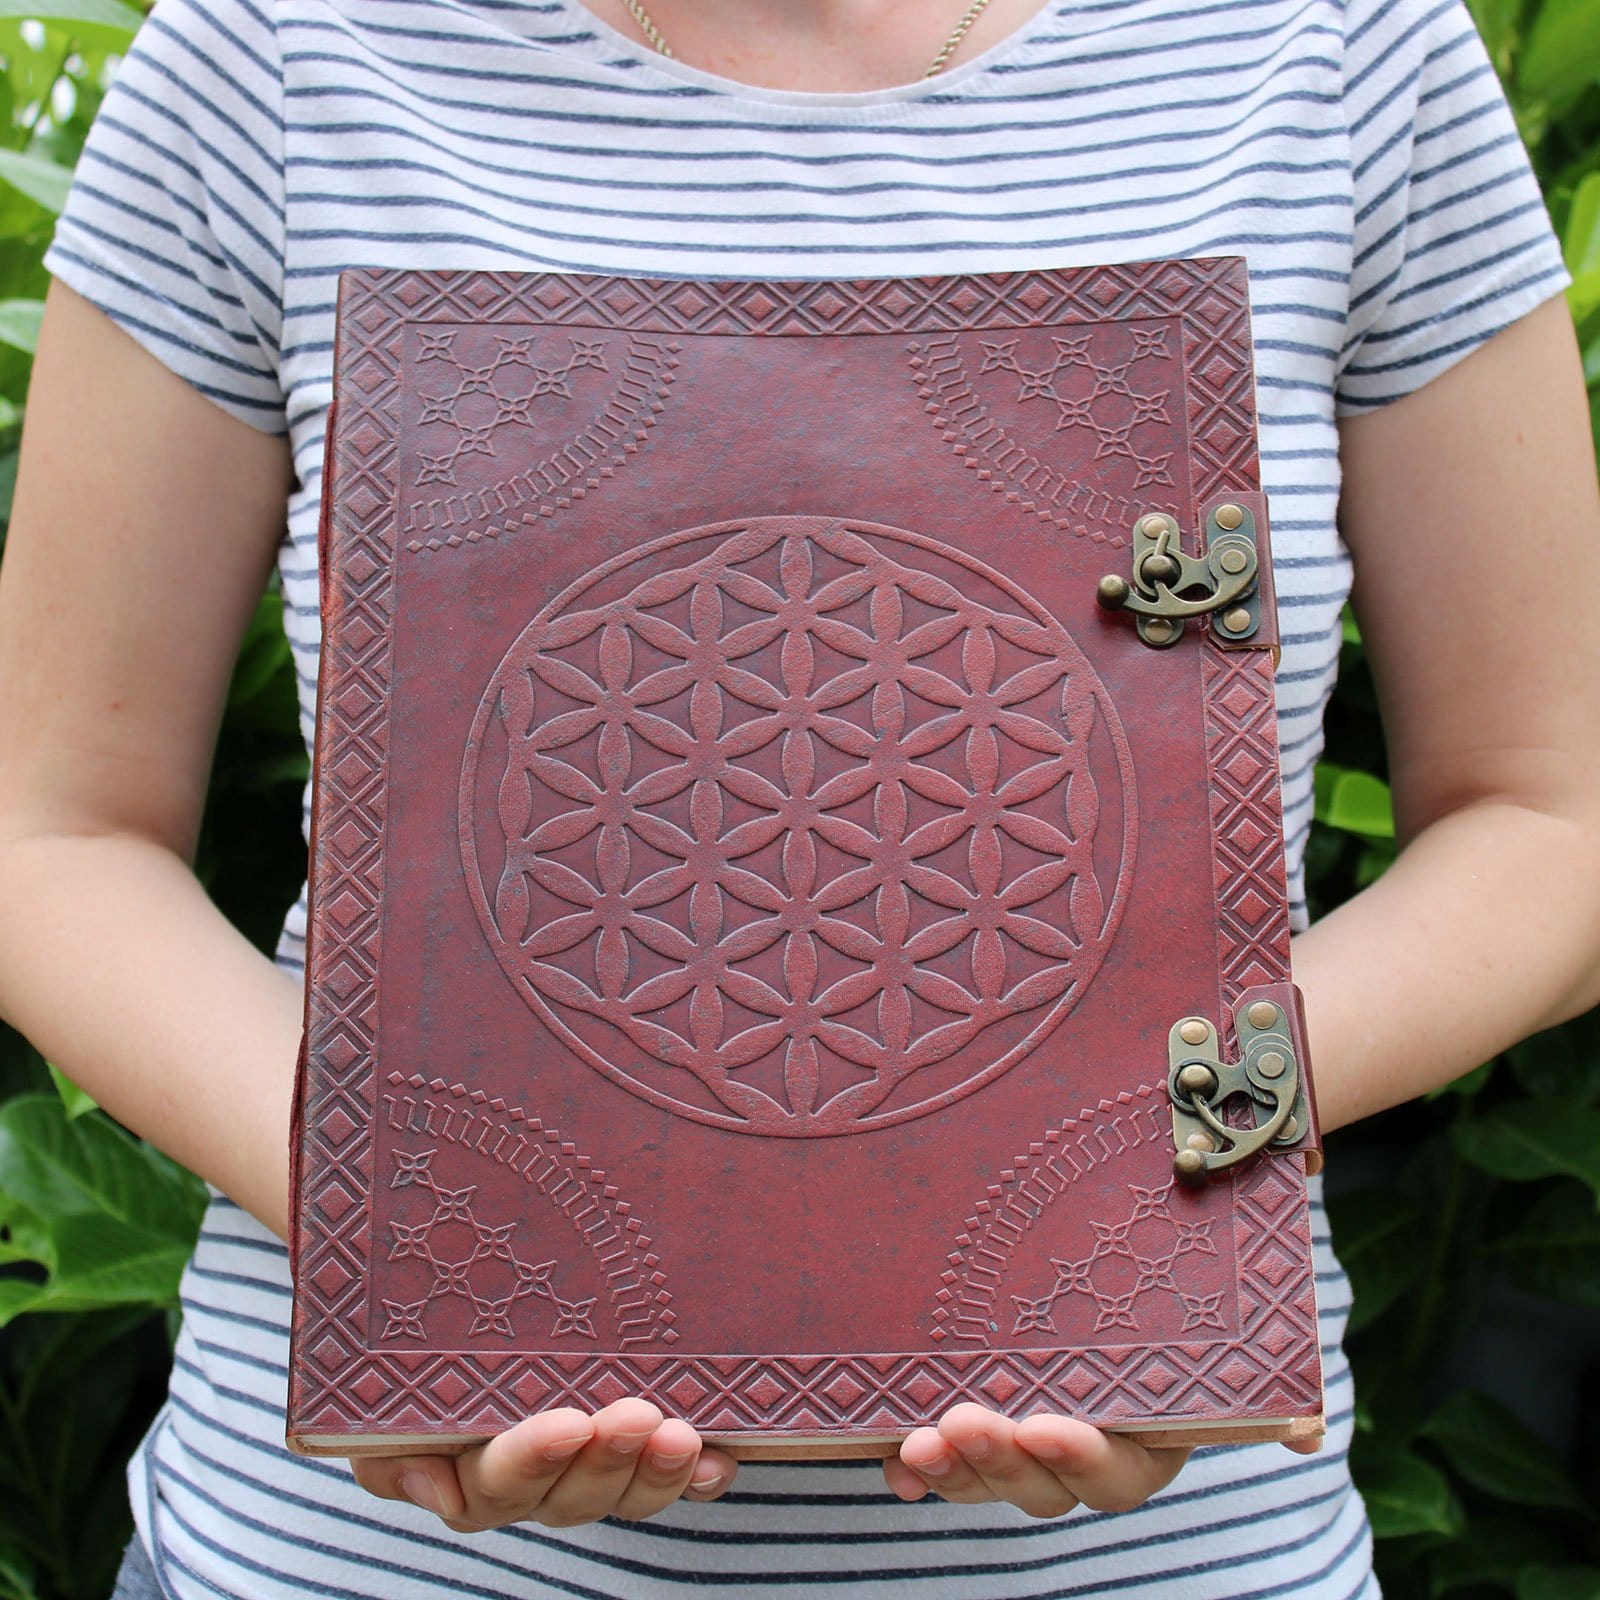 Huge Flower of Life Leather Book 10 x 13" (200 pages) - ShopGreenToday